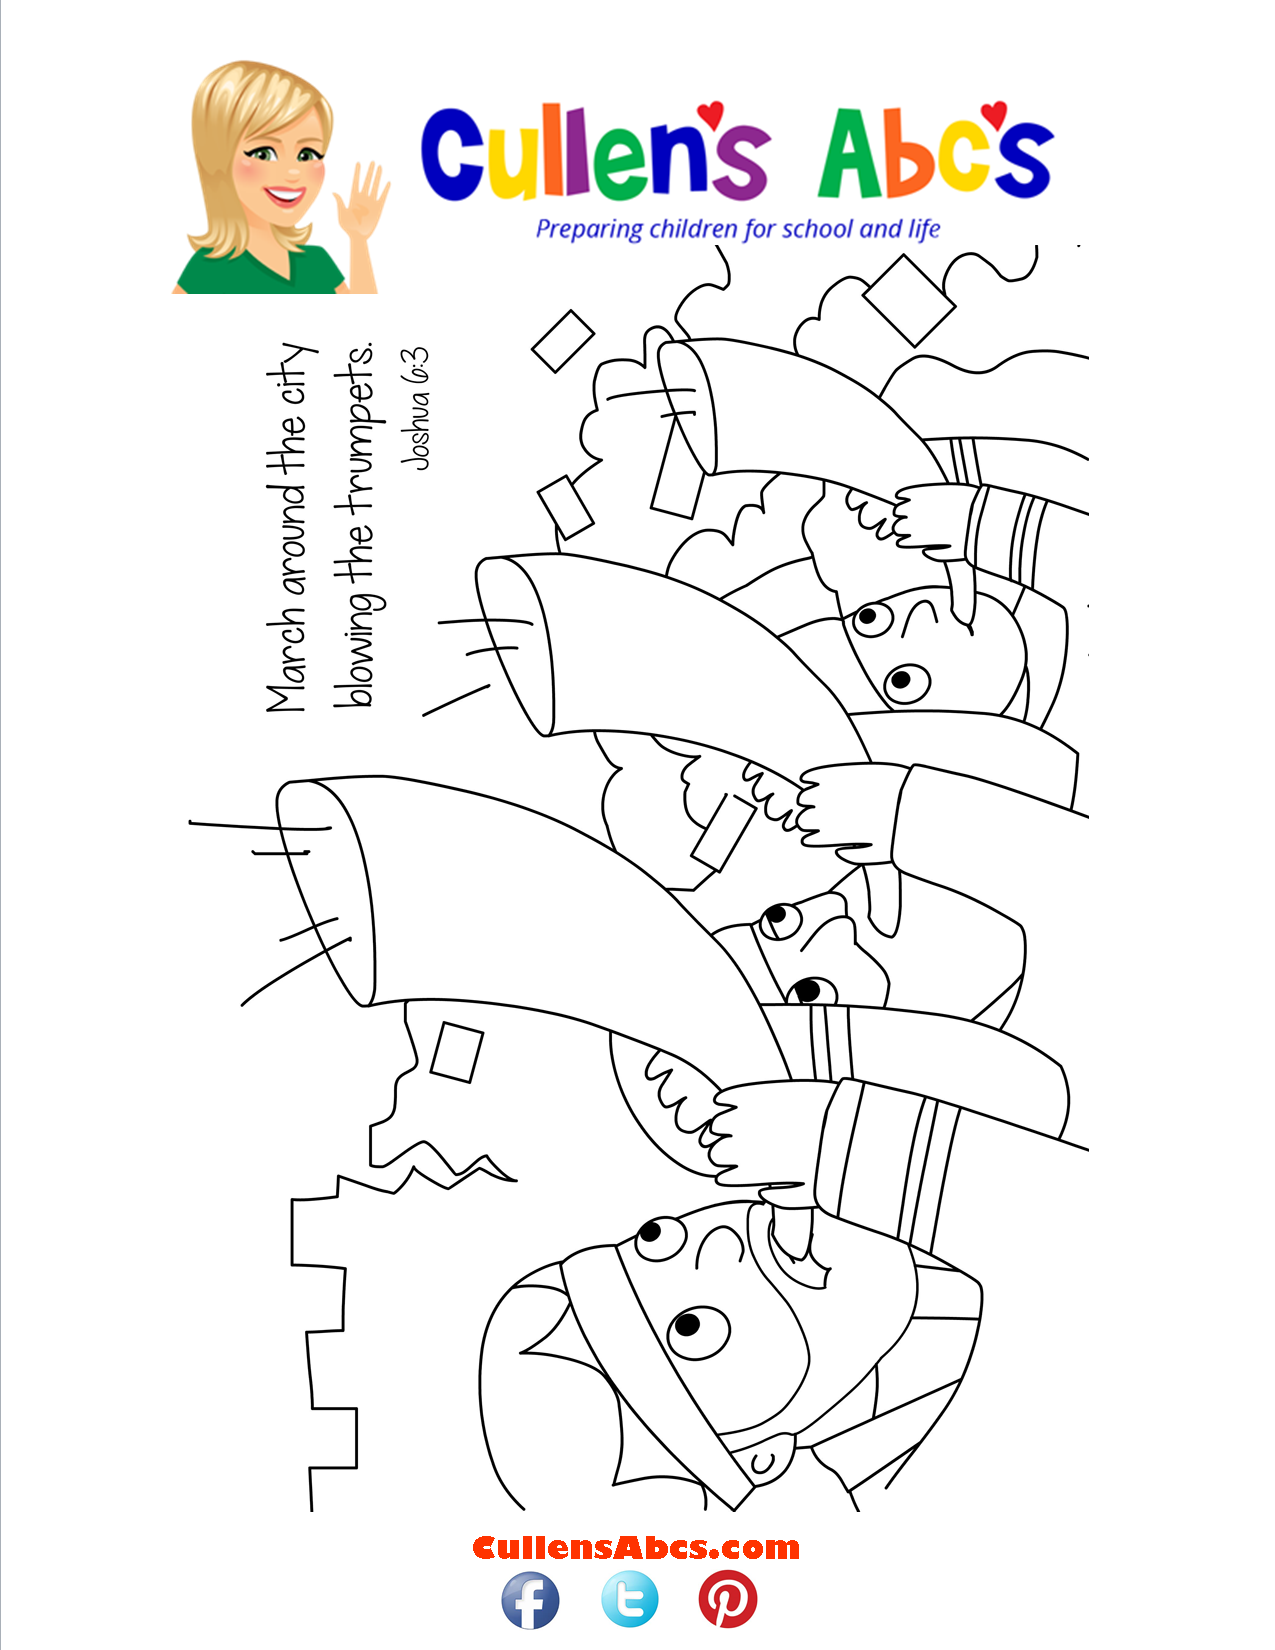 Bible memory verse coloring page the battle of jericho free childrens videos activities